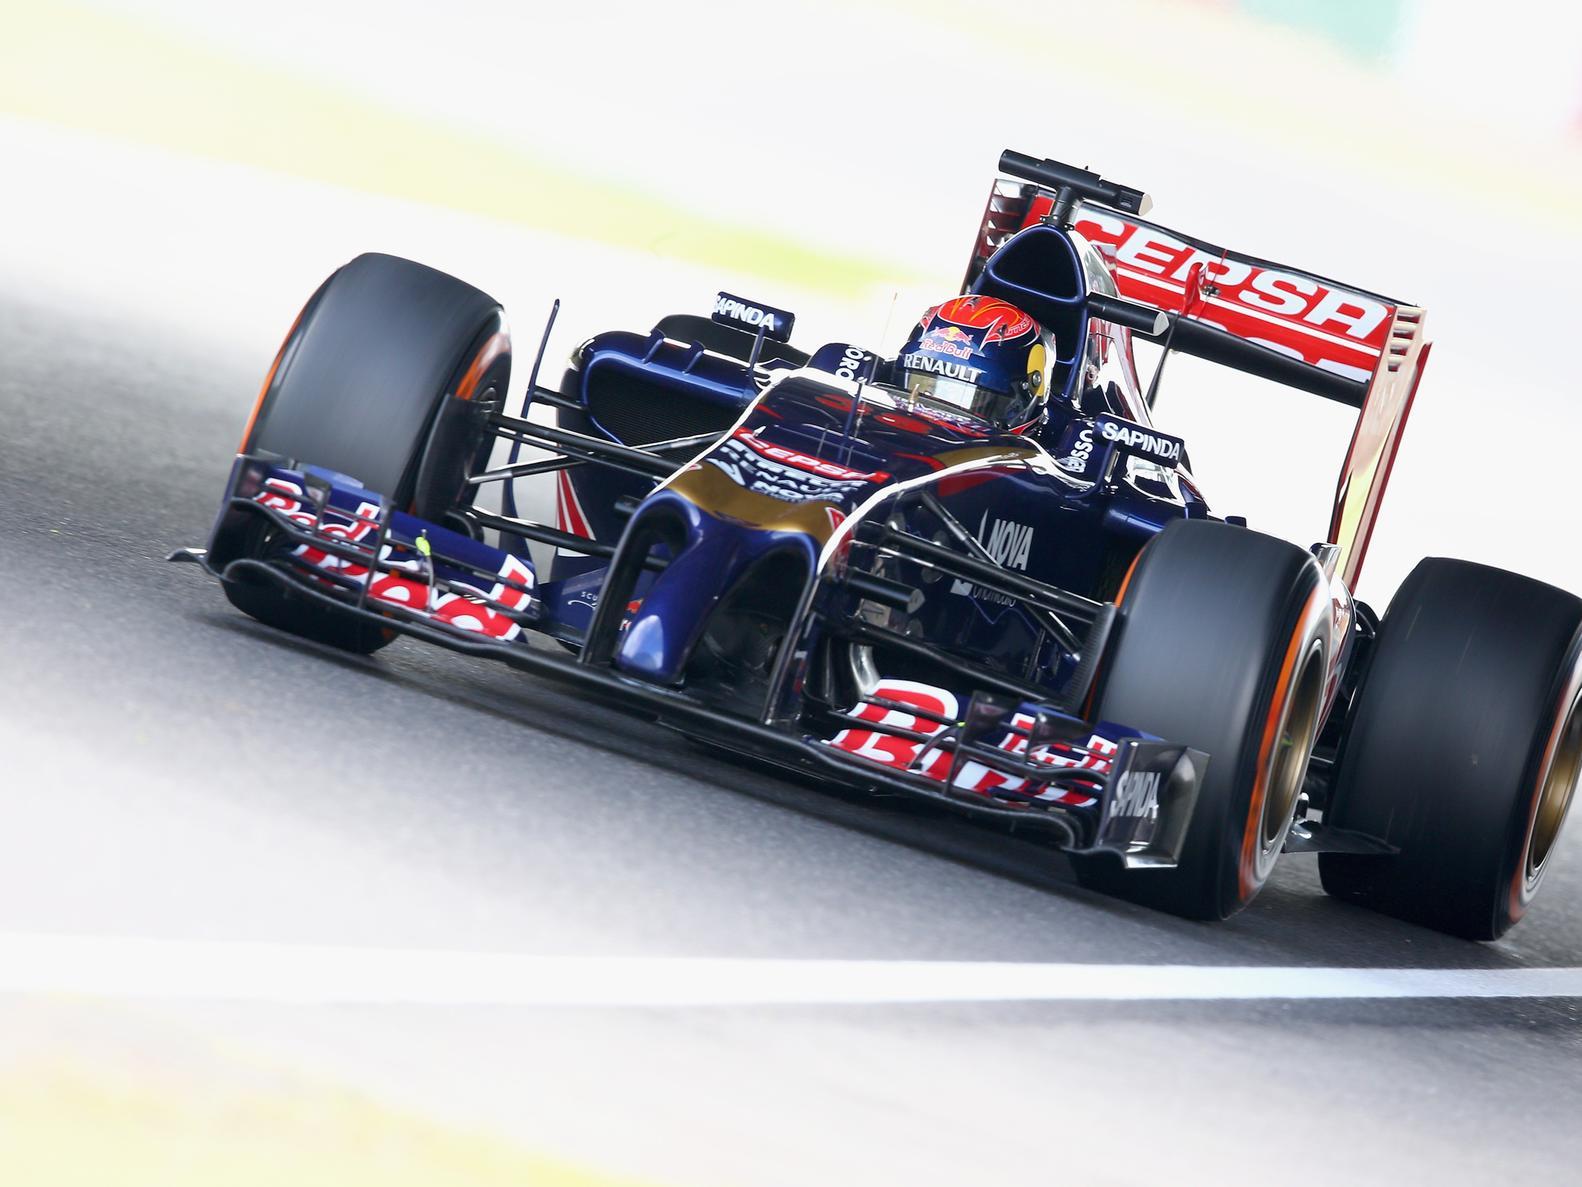 By taking part in FP1, Verstappen became the youngest driver to take part in a Grand Prix weekend ahead of his full-time drive with Toro Rosso in 2015.